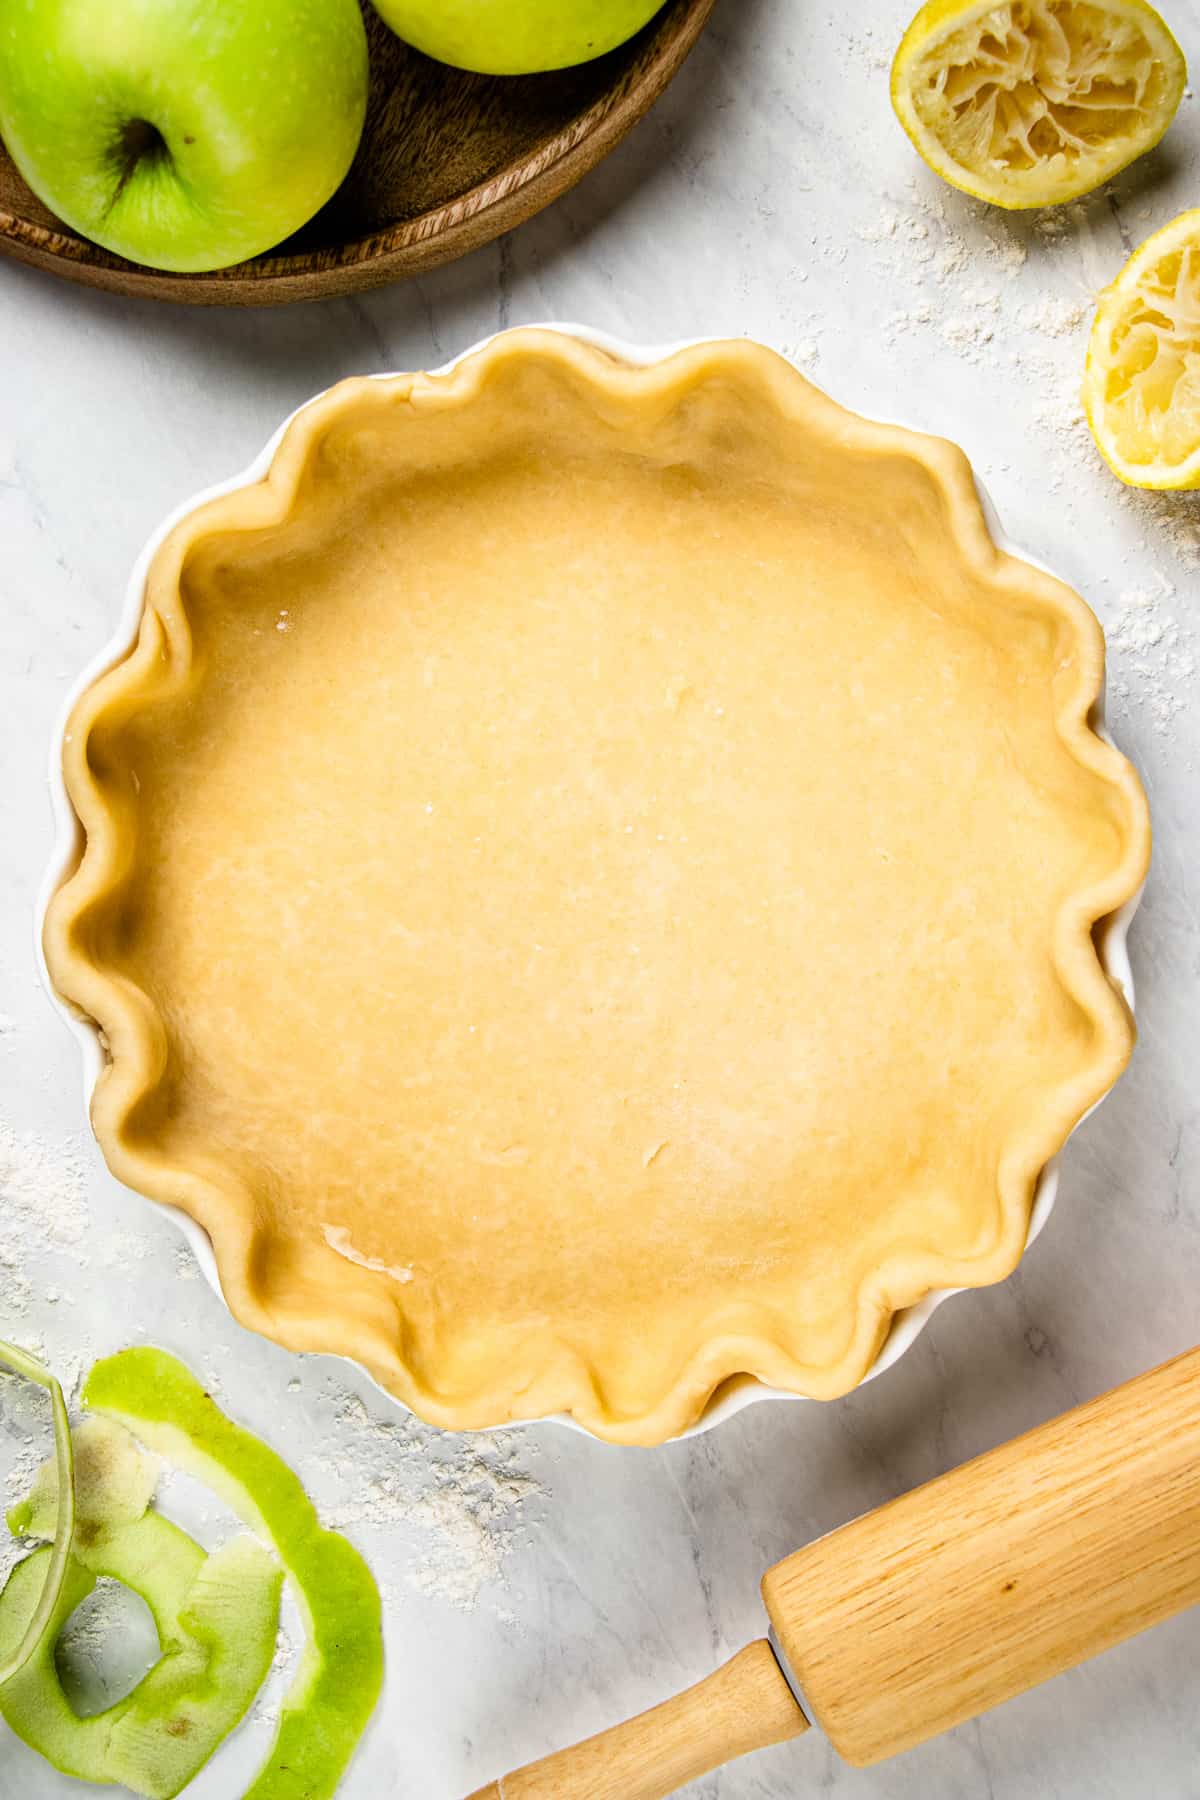 Unbaked pie crust in a white round baking pan.